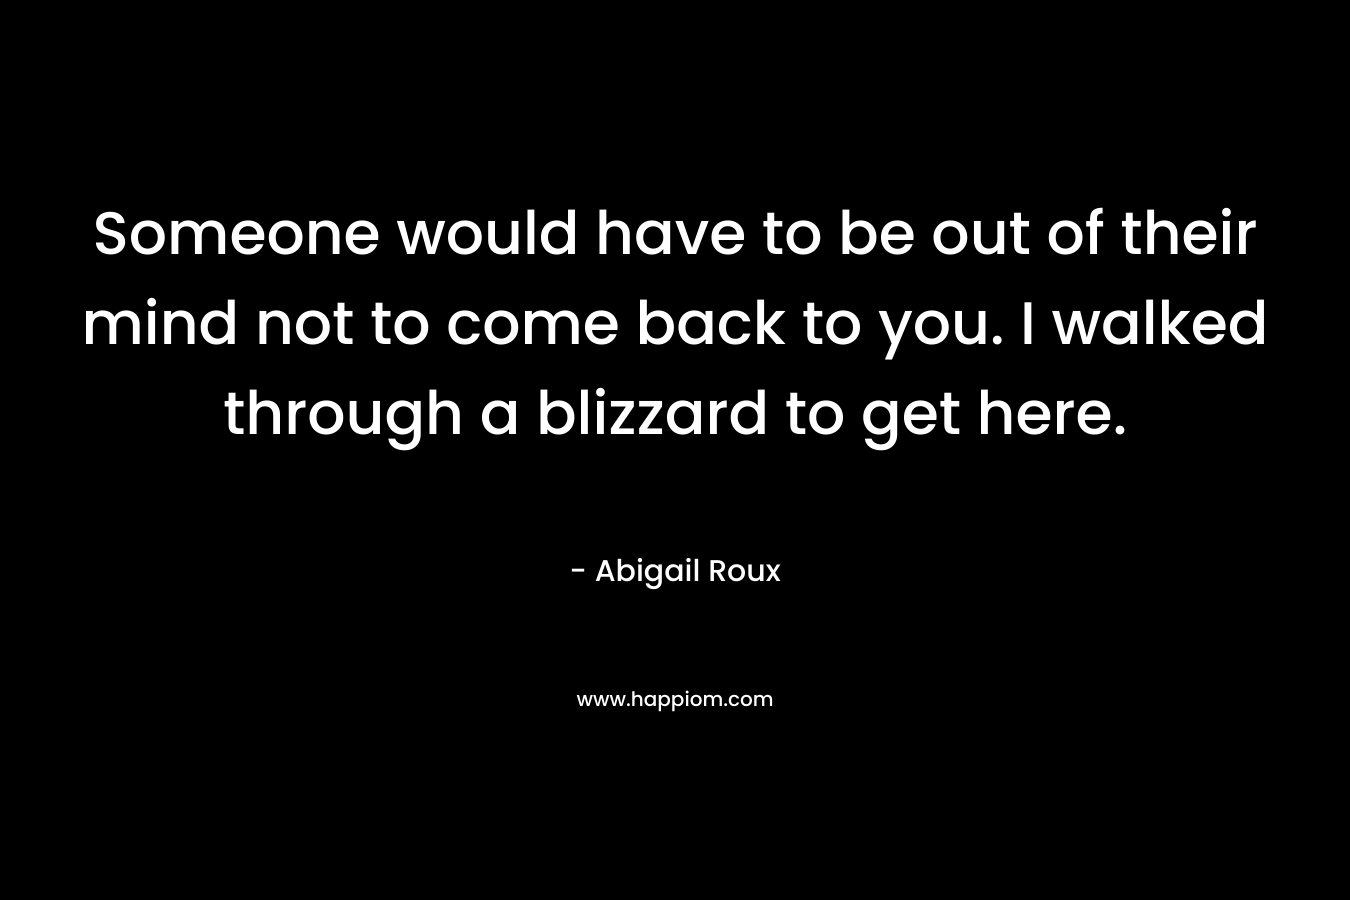 Someone would have to be out of their mind not to come back to you. I walked through a blizzard to get here.